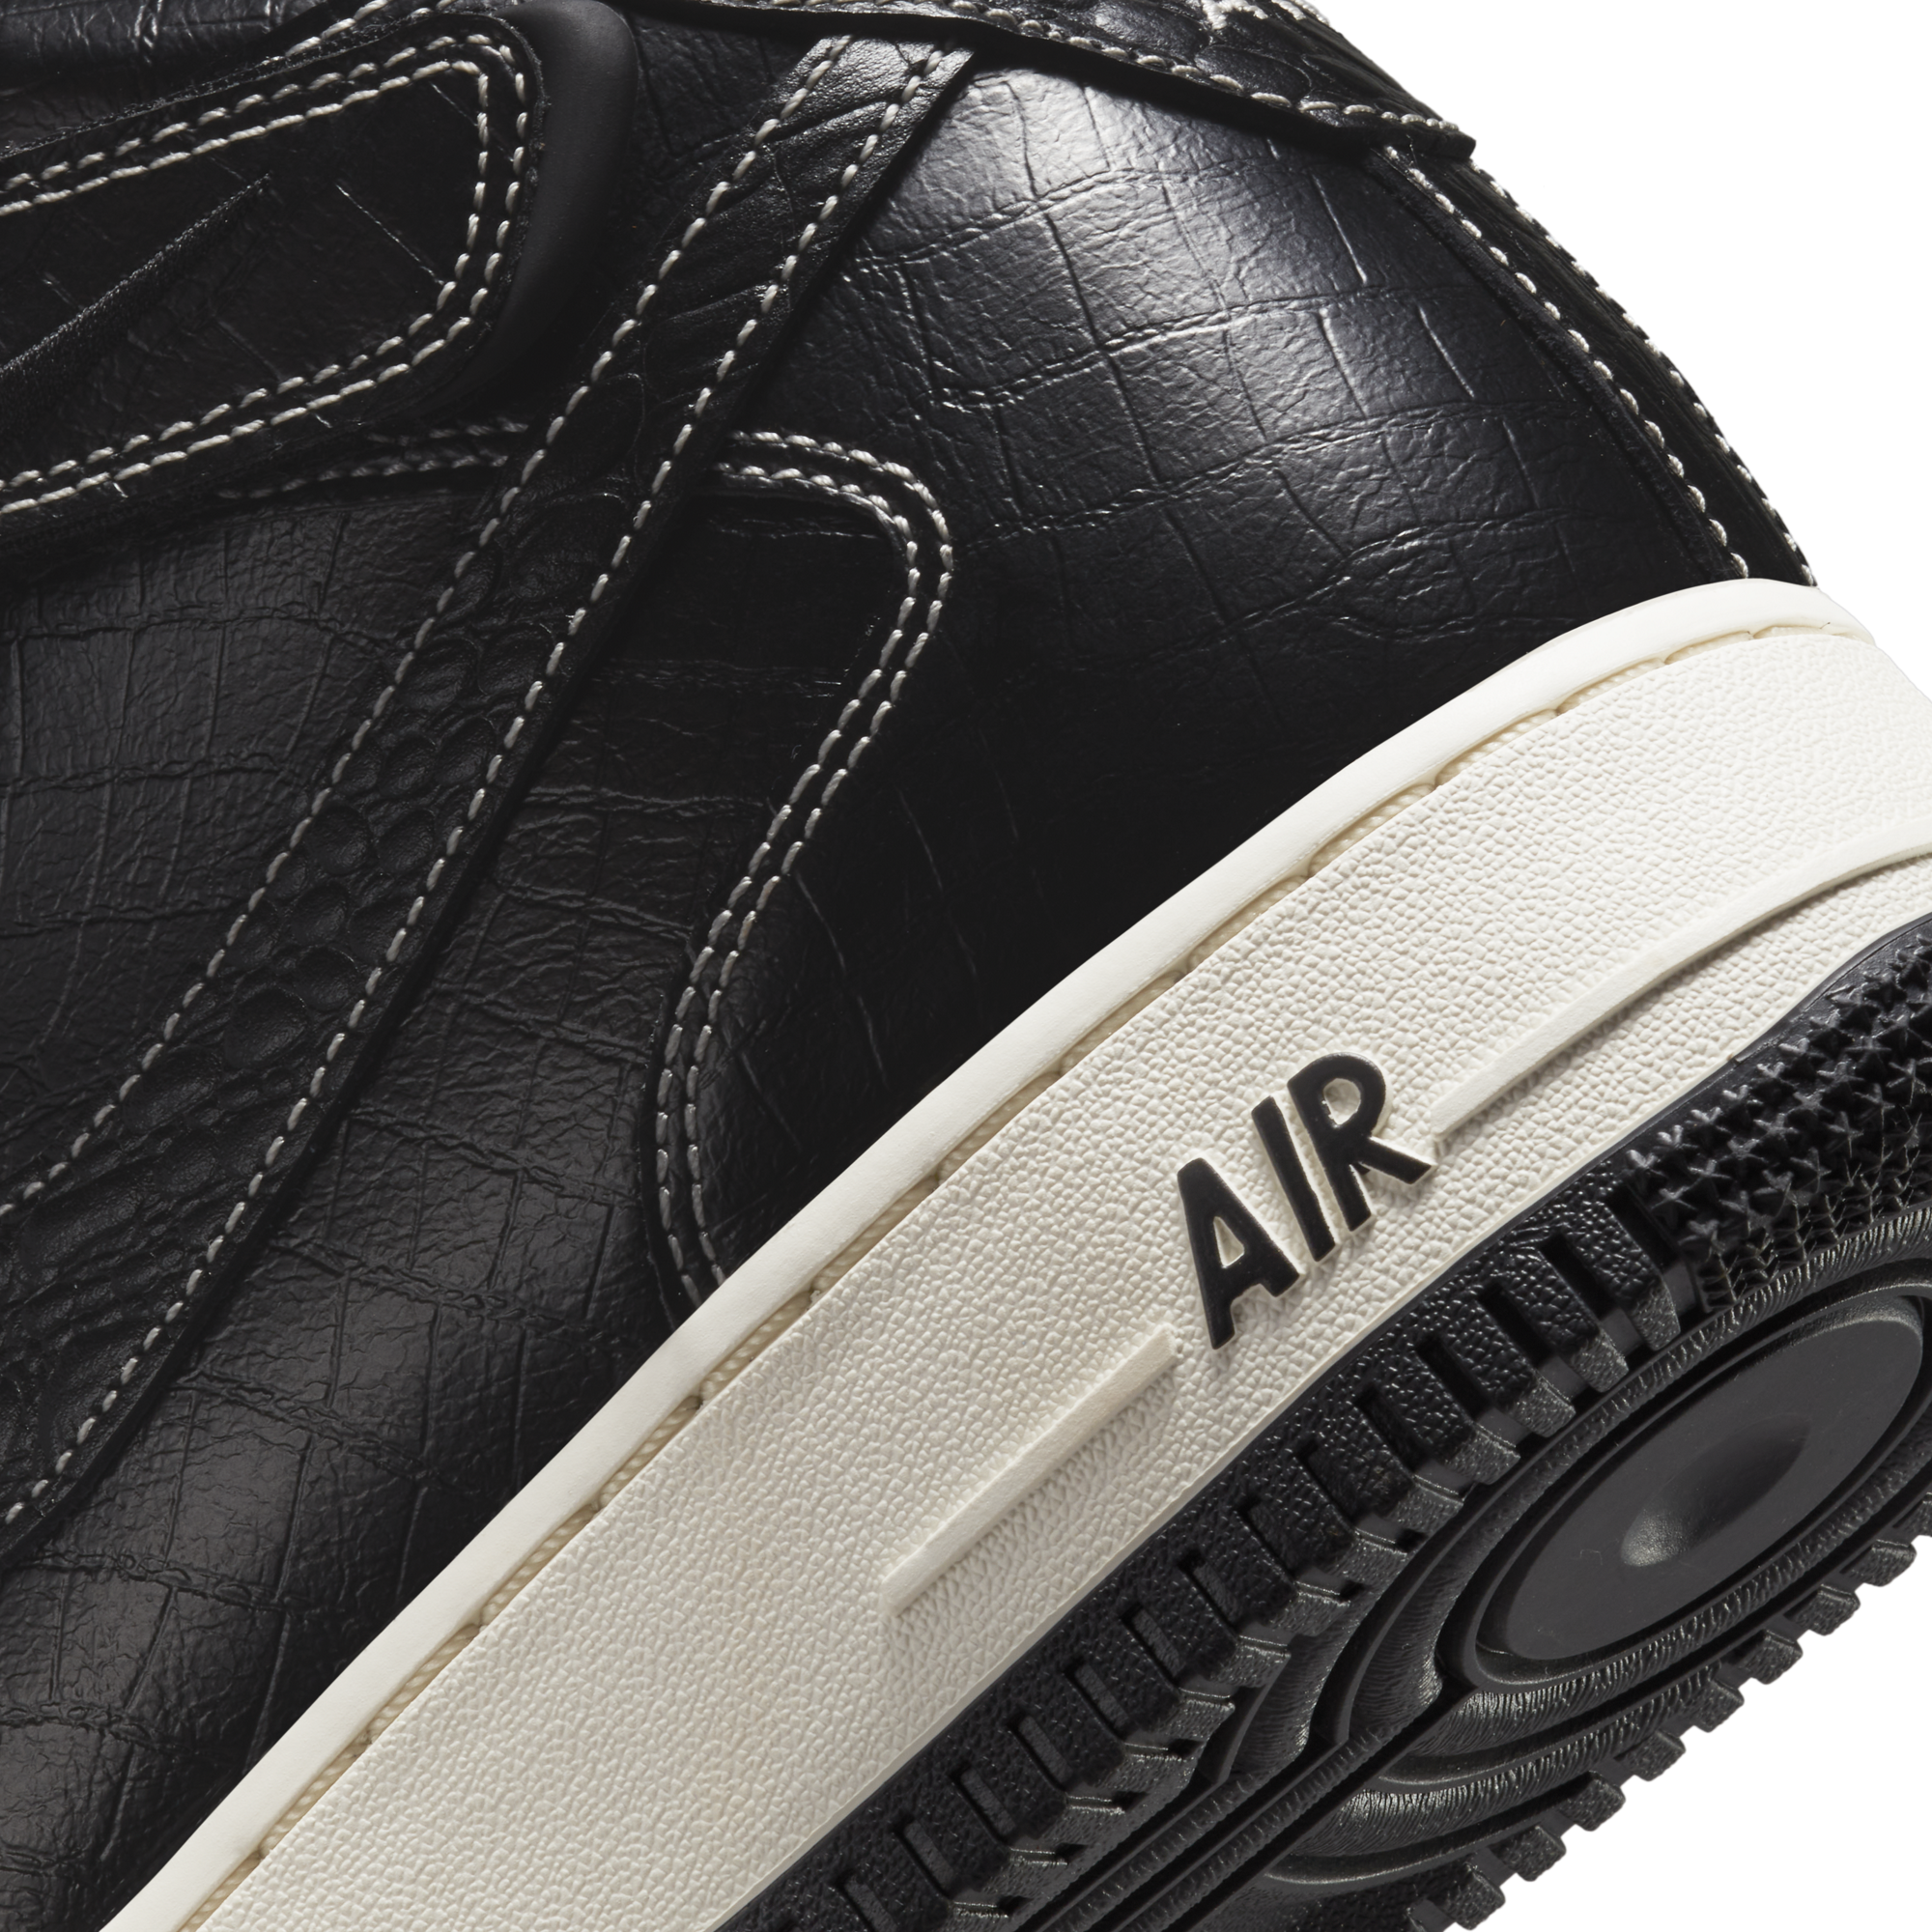 Nike Air Force 1 Mid '07 LX 'Anniversary Edition'